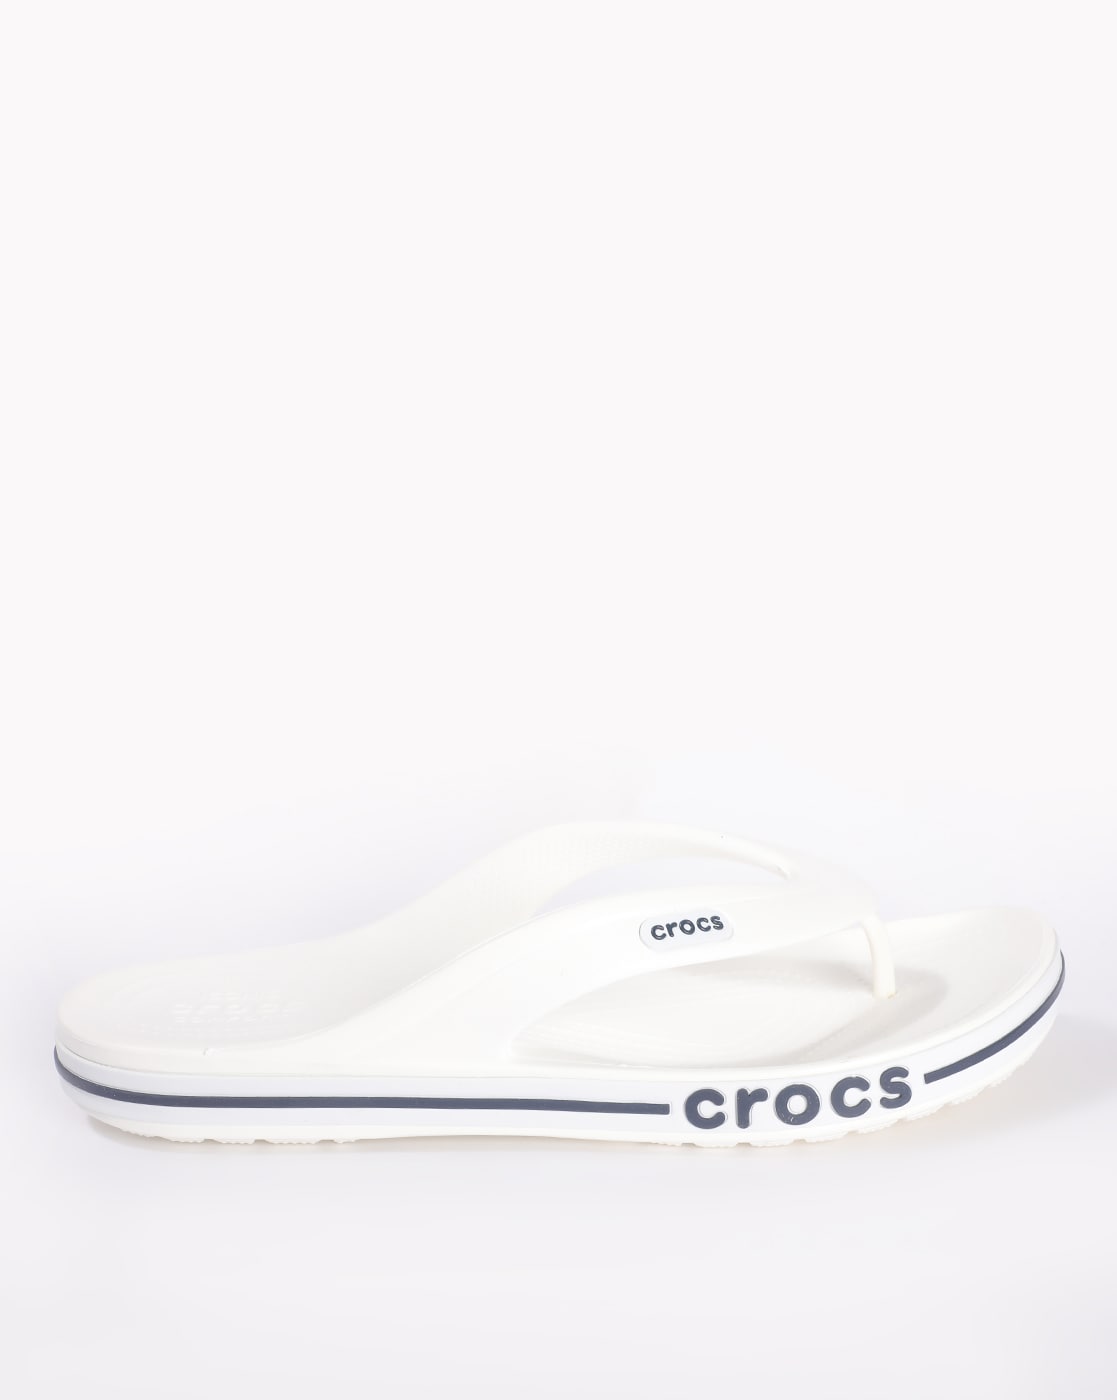 crocs slippers black and white